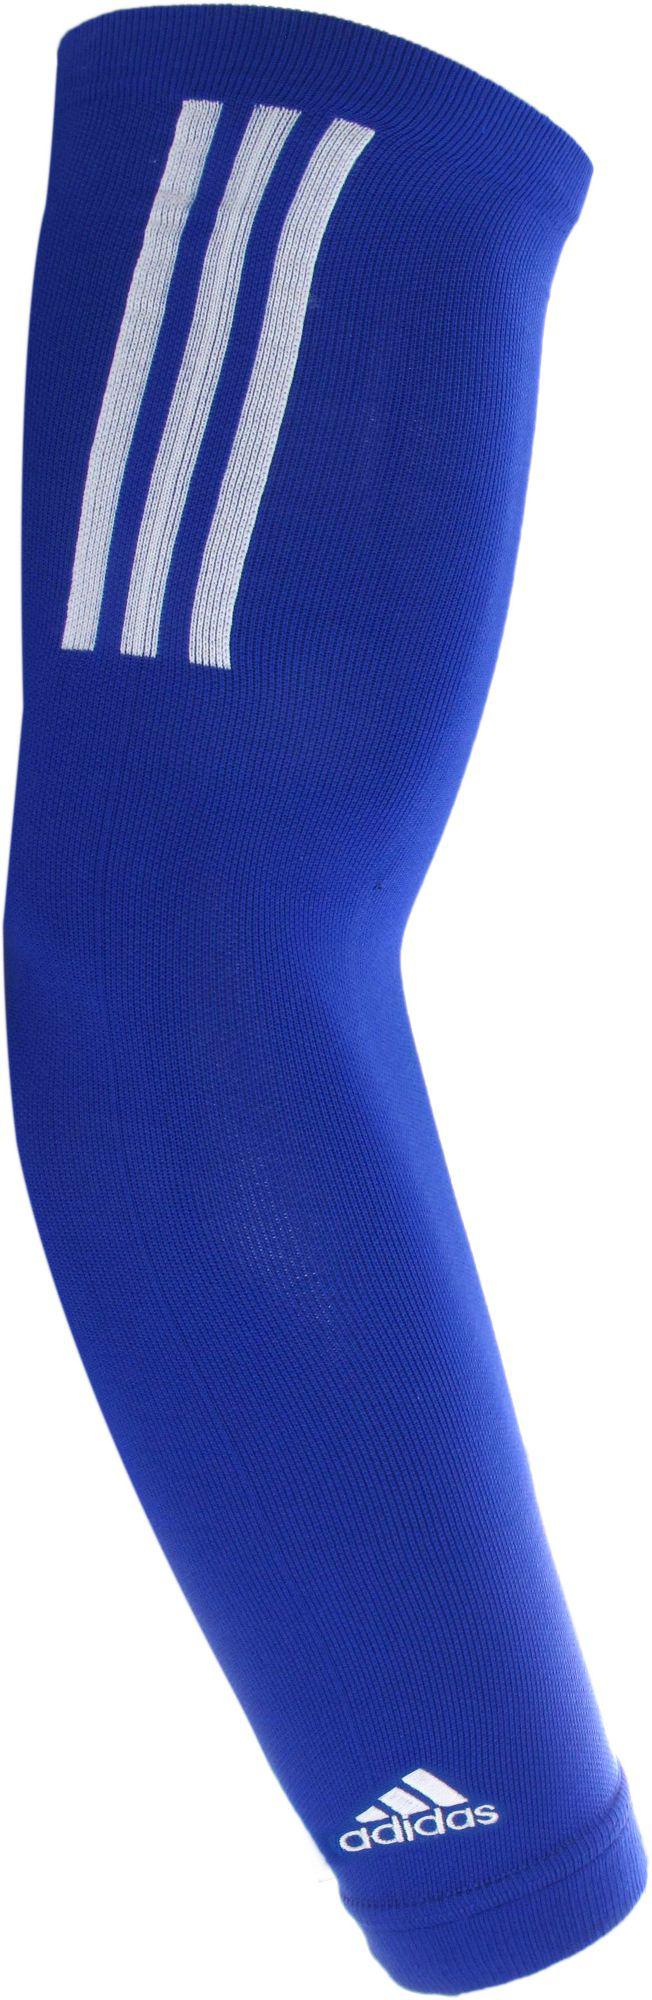 adidas Compression Arm Sleeve in Cobalt/White (Blue) for Men | Lyst